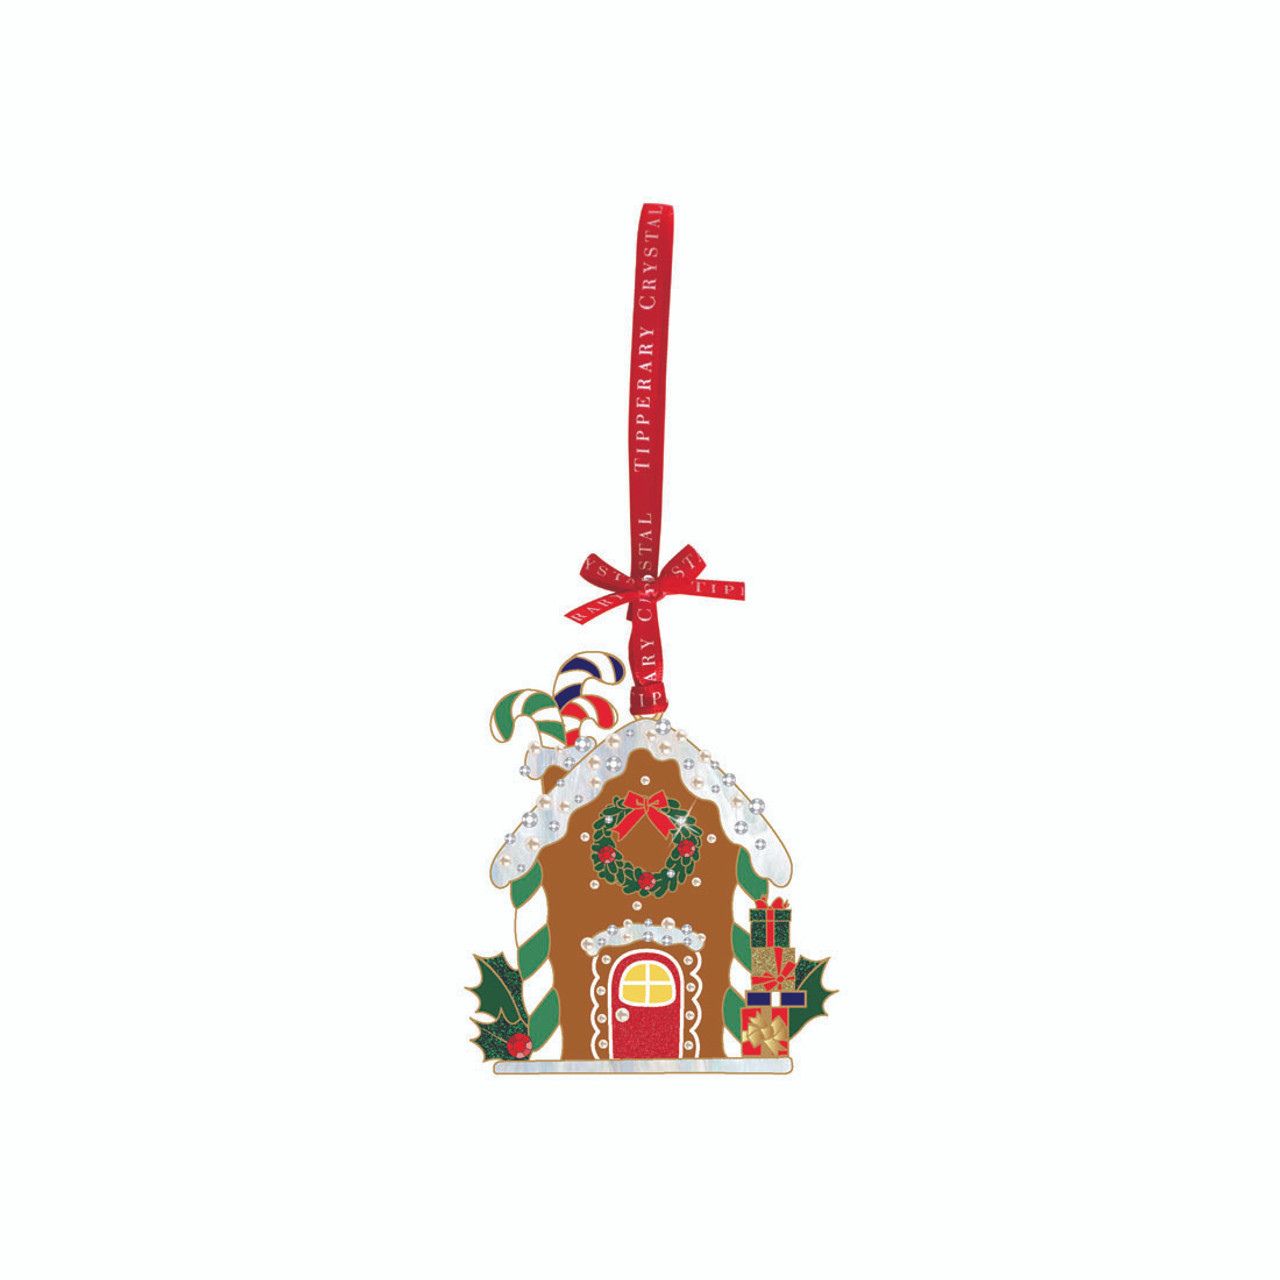 Sparkle Gingerbread House with Wreath Hanging Decoration  We just Love Christmas! The festive season, the giving of gifts, creating memories and being together with family and loved ones. Have lots of fun with our lovingly designed and created Christmas decorations, each one has a magic sparkle of elf dust!